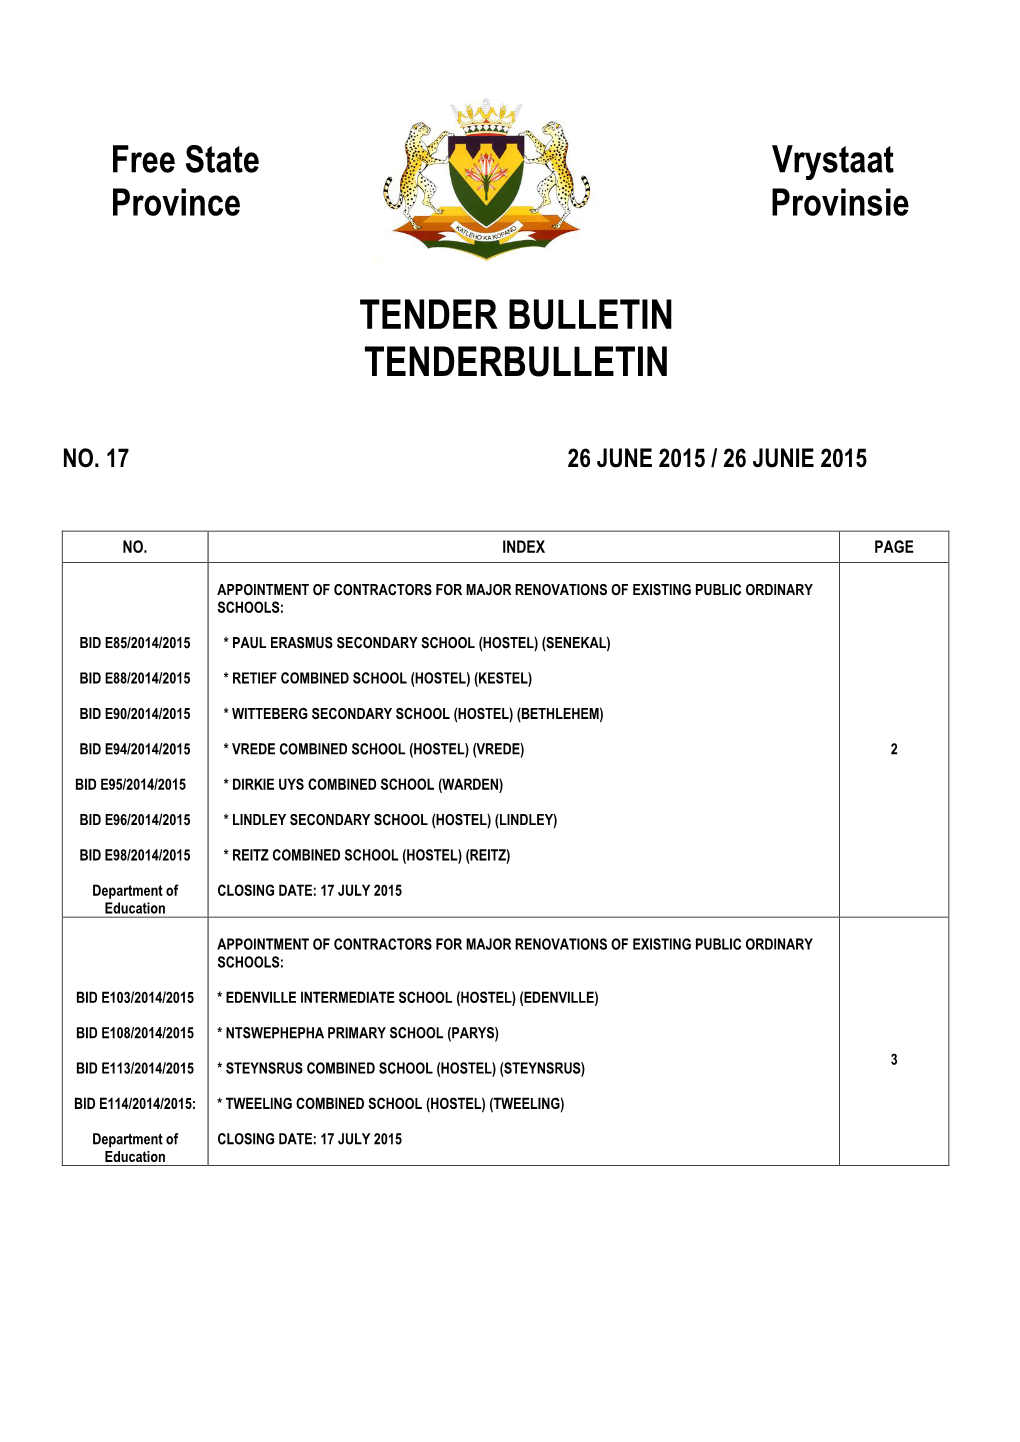 Tender Bulletin for Free State No 17 of 26-June-2015